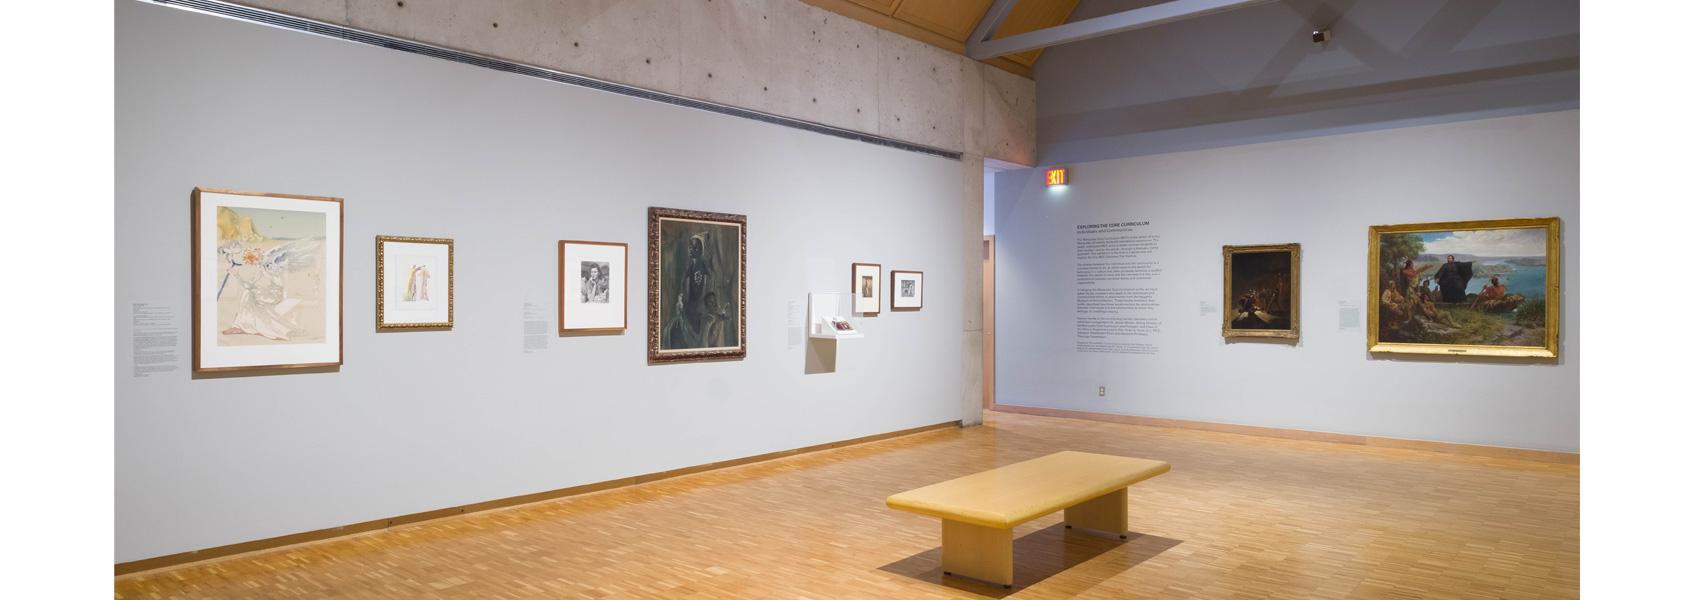 Image from the exhibition, "Exploring the Core Curriculum: Individuals and Communities," which appeared at the Haggerty Museum of Art at Marquette University in 2019. 